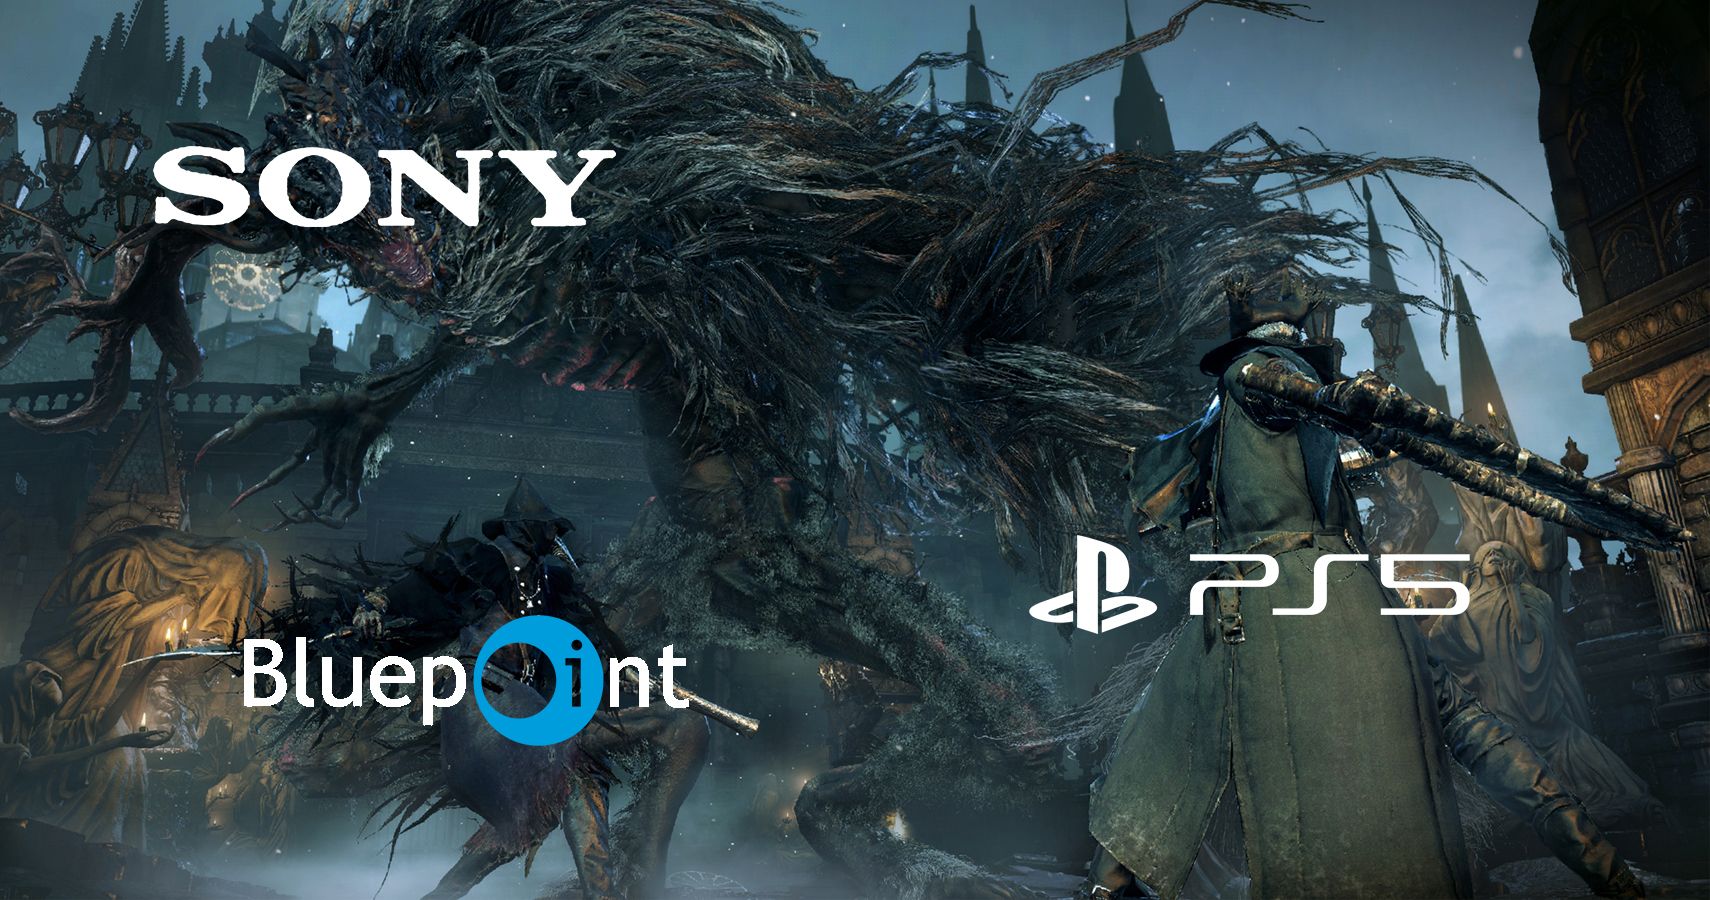 When is Bloodborne PC Port and PS5 Patch out? - The Leak